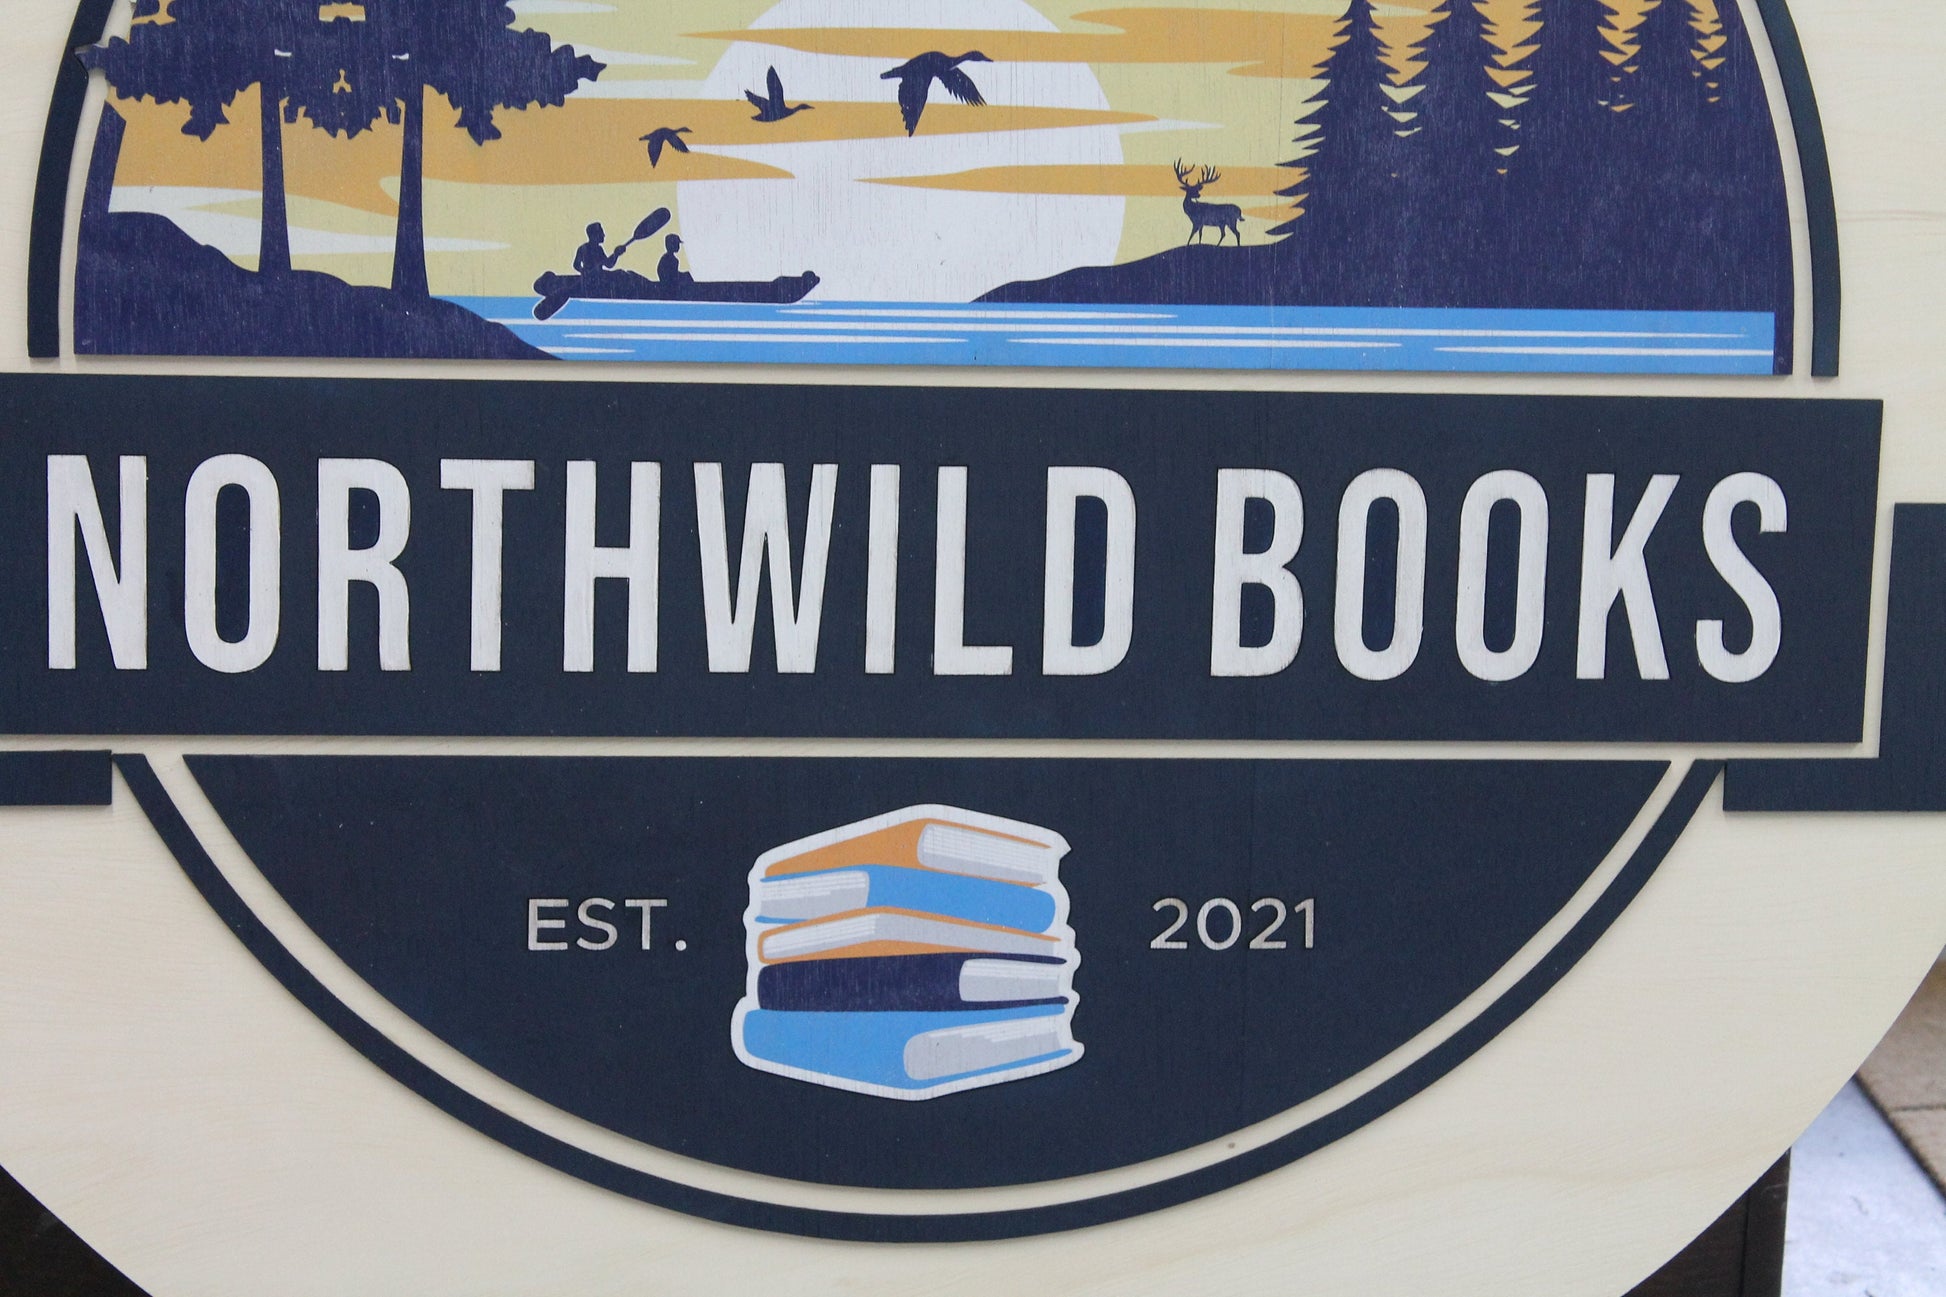 Book Store Small Business Logo Custom Round Sign Printed In Color Raised Lettering Sunset Airplane Commerical Store Front Signage